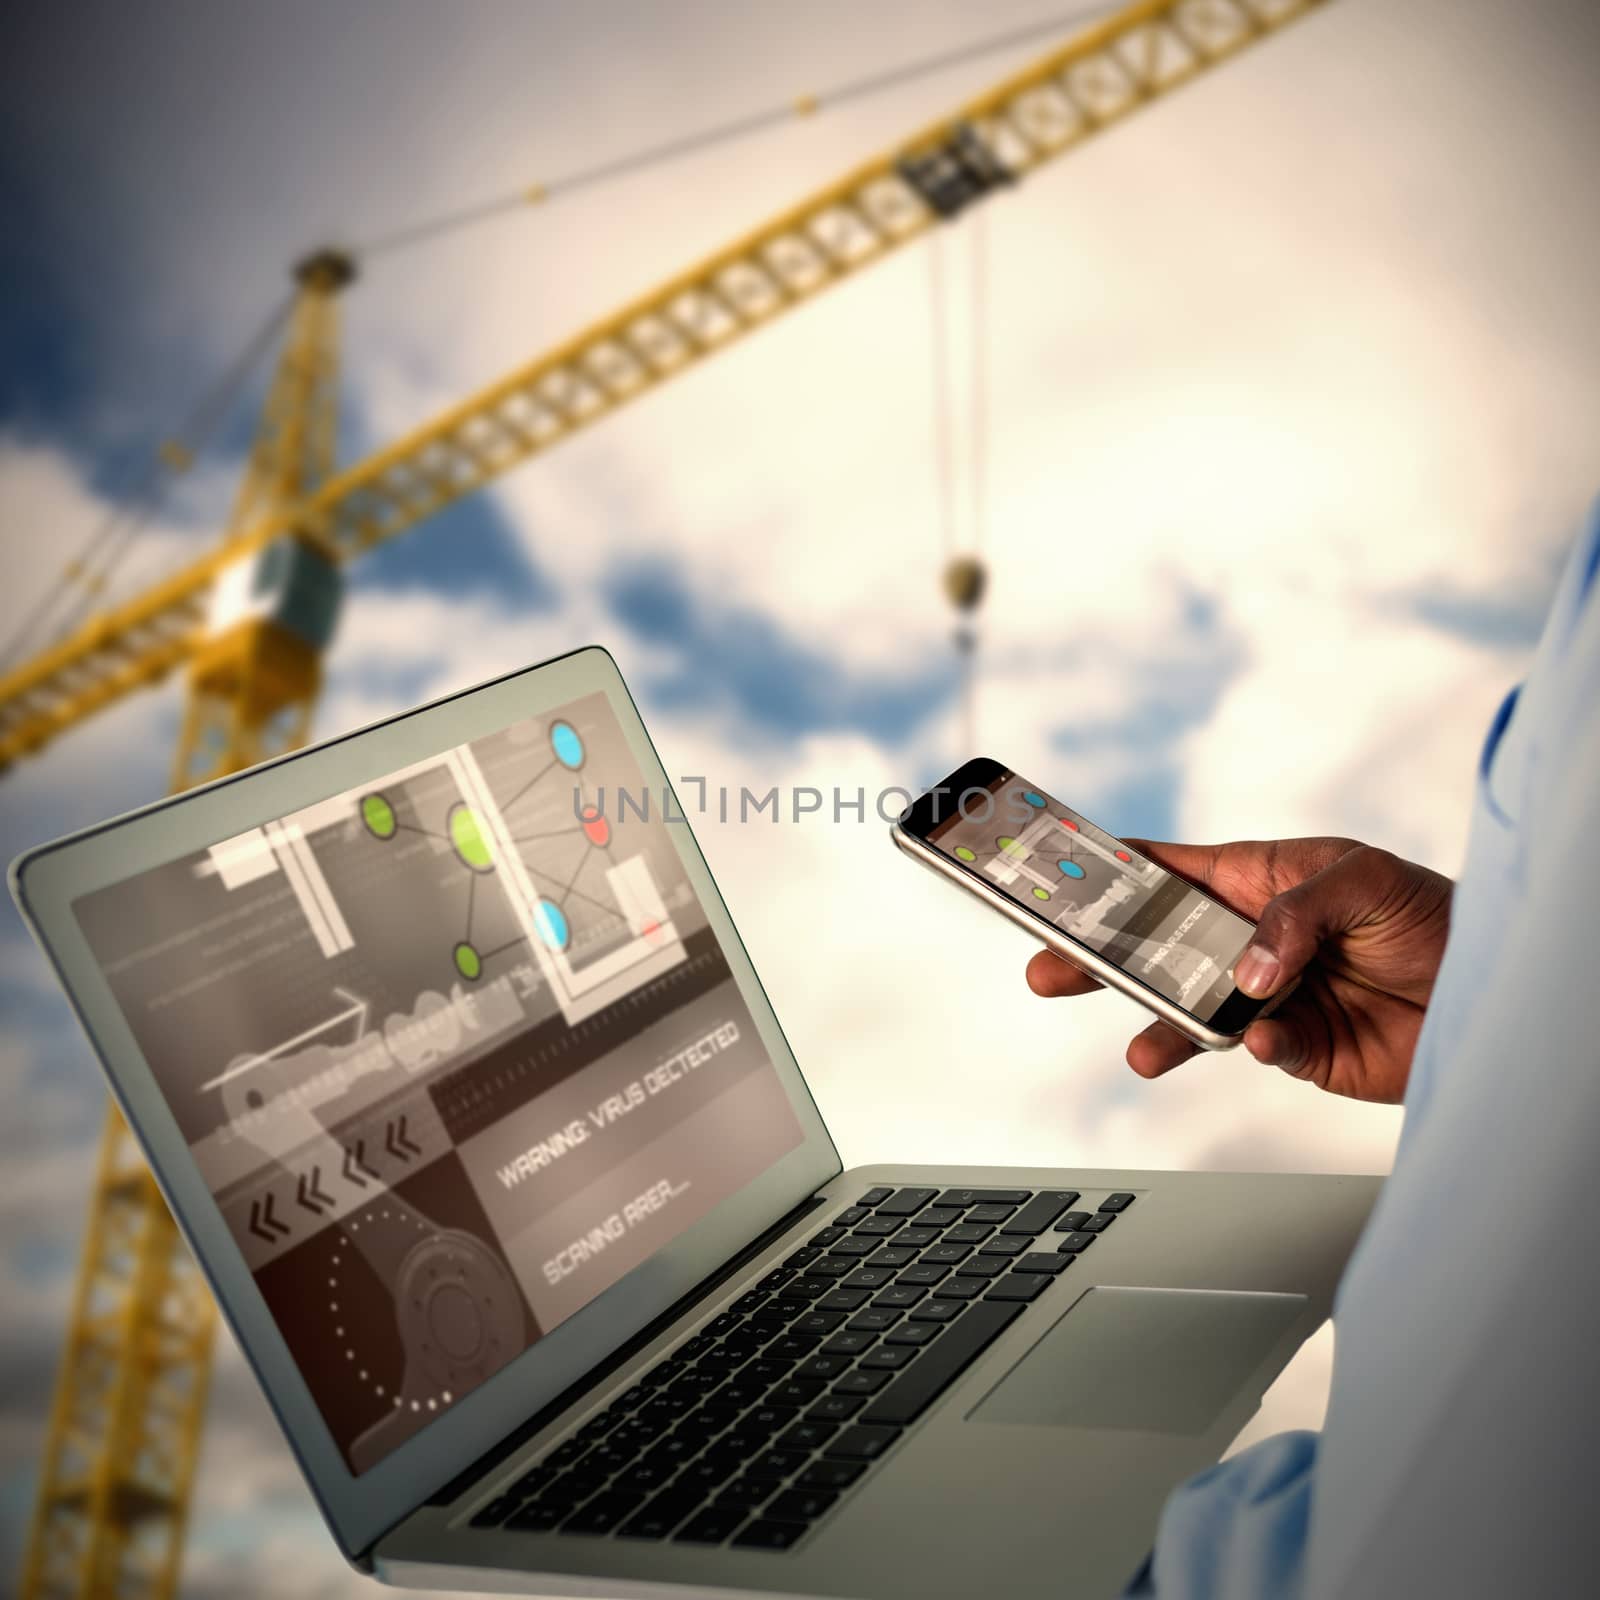 Businessman using mobile phone and laptop against 3d image of yellow crane against cloudy sky